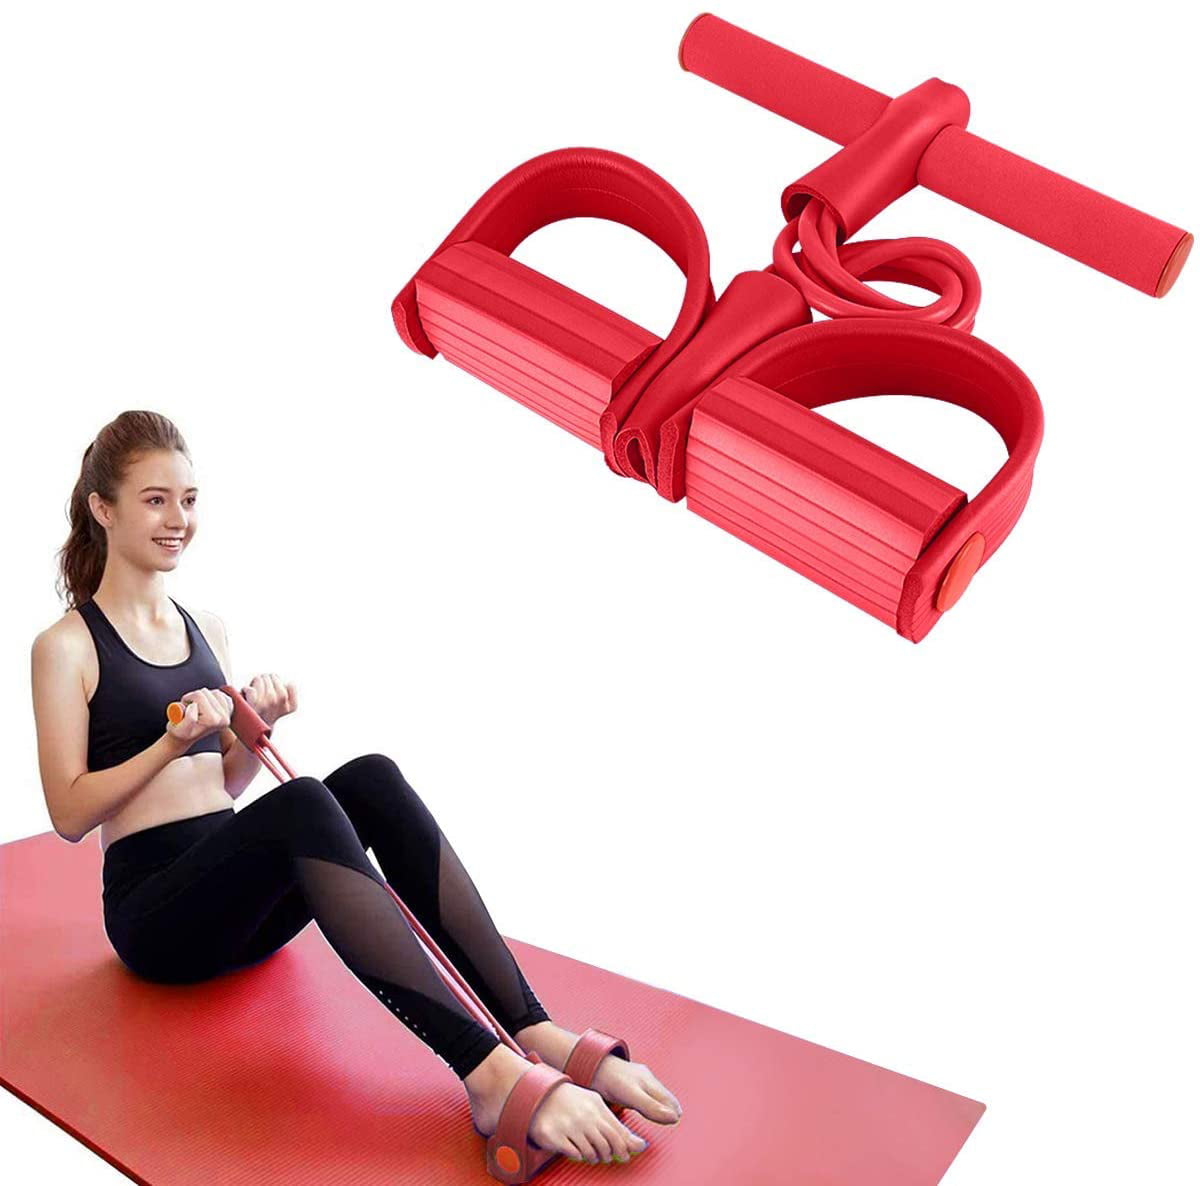 50cm 4-Tube Foot Pedal Pull Yoga Rope Resistance Exercise Sit-up Fitness Tube 